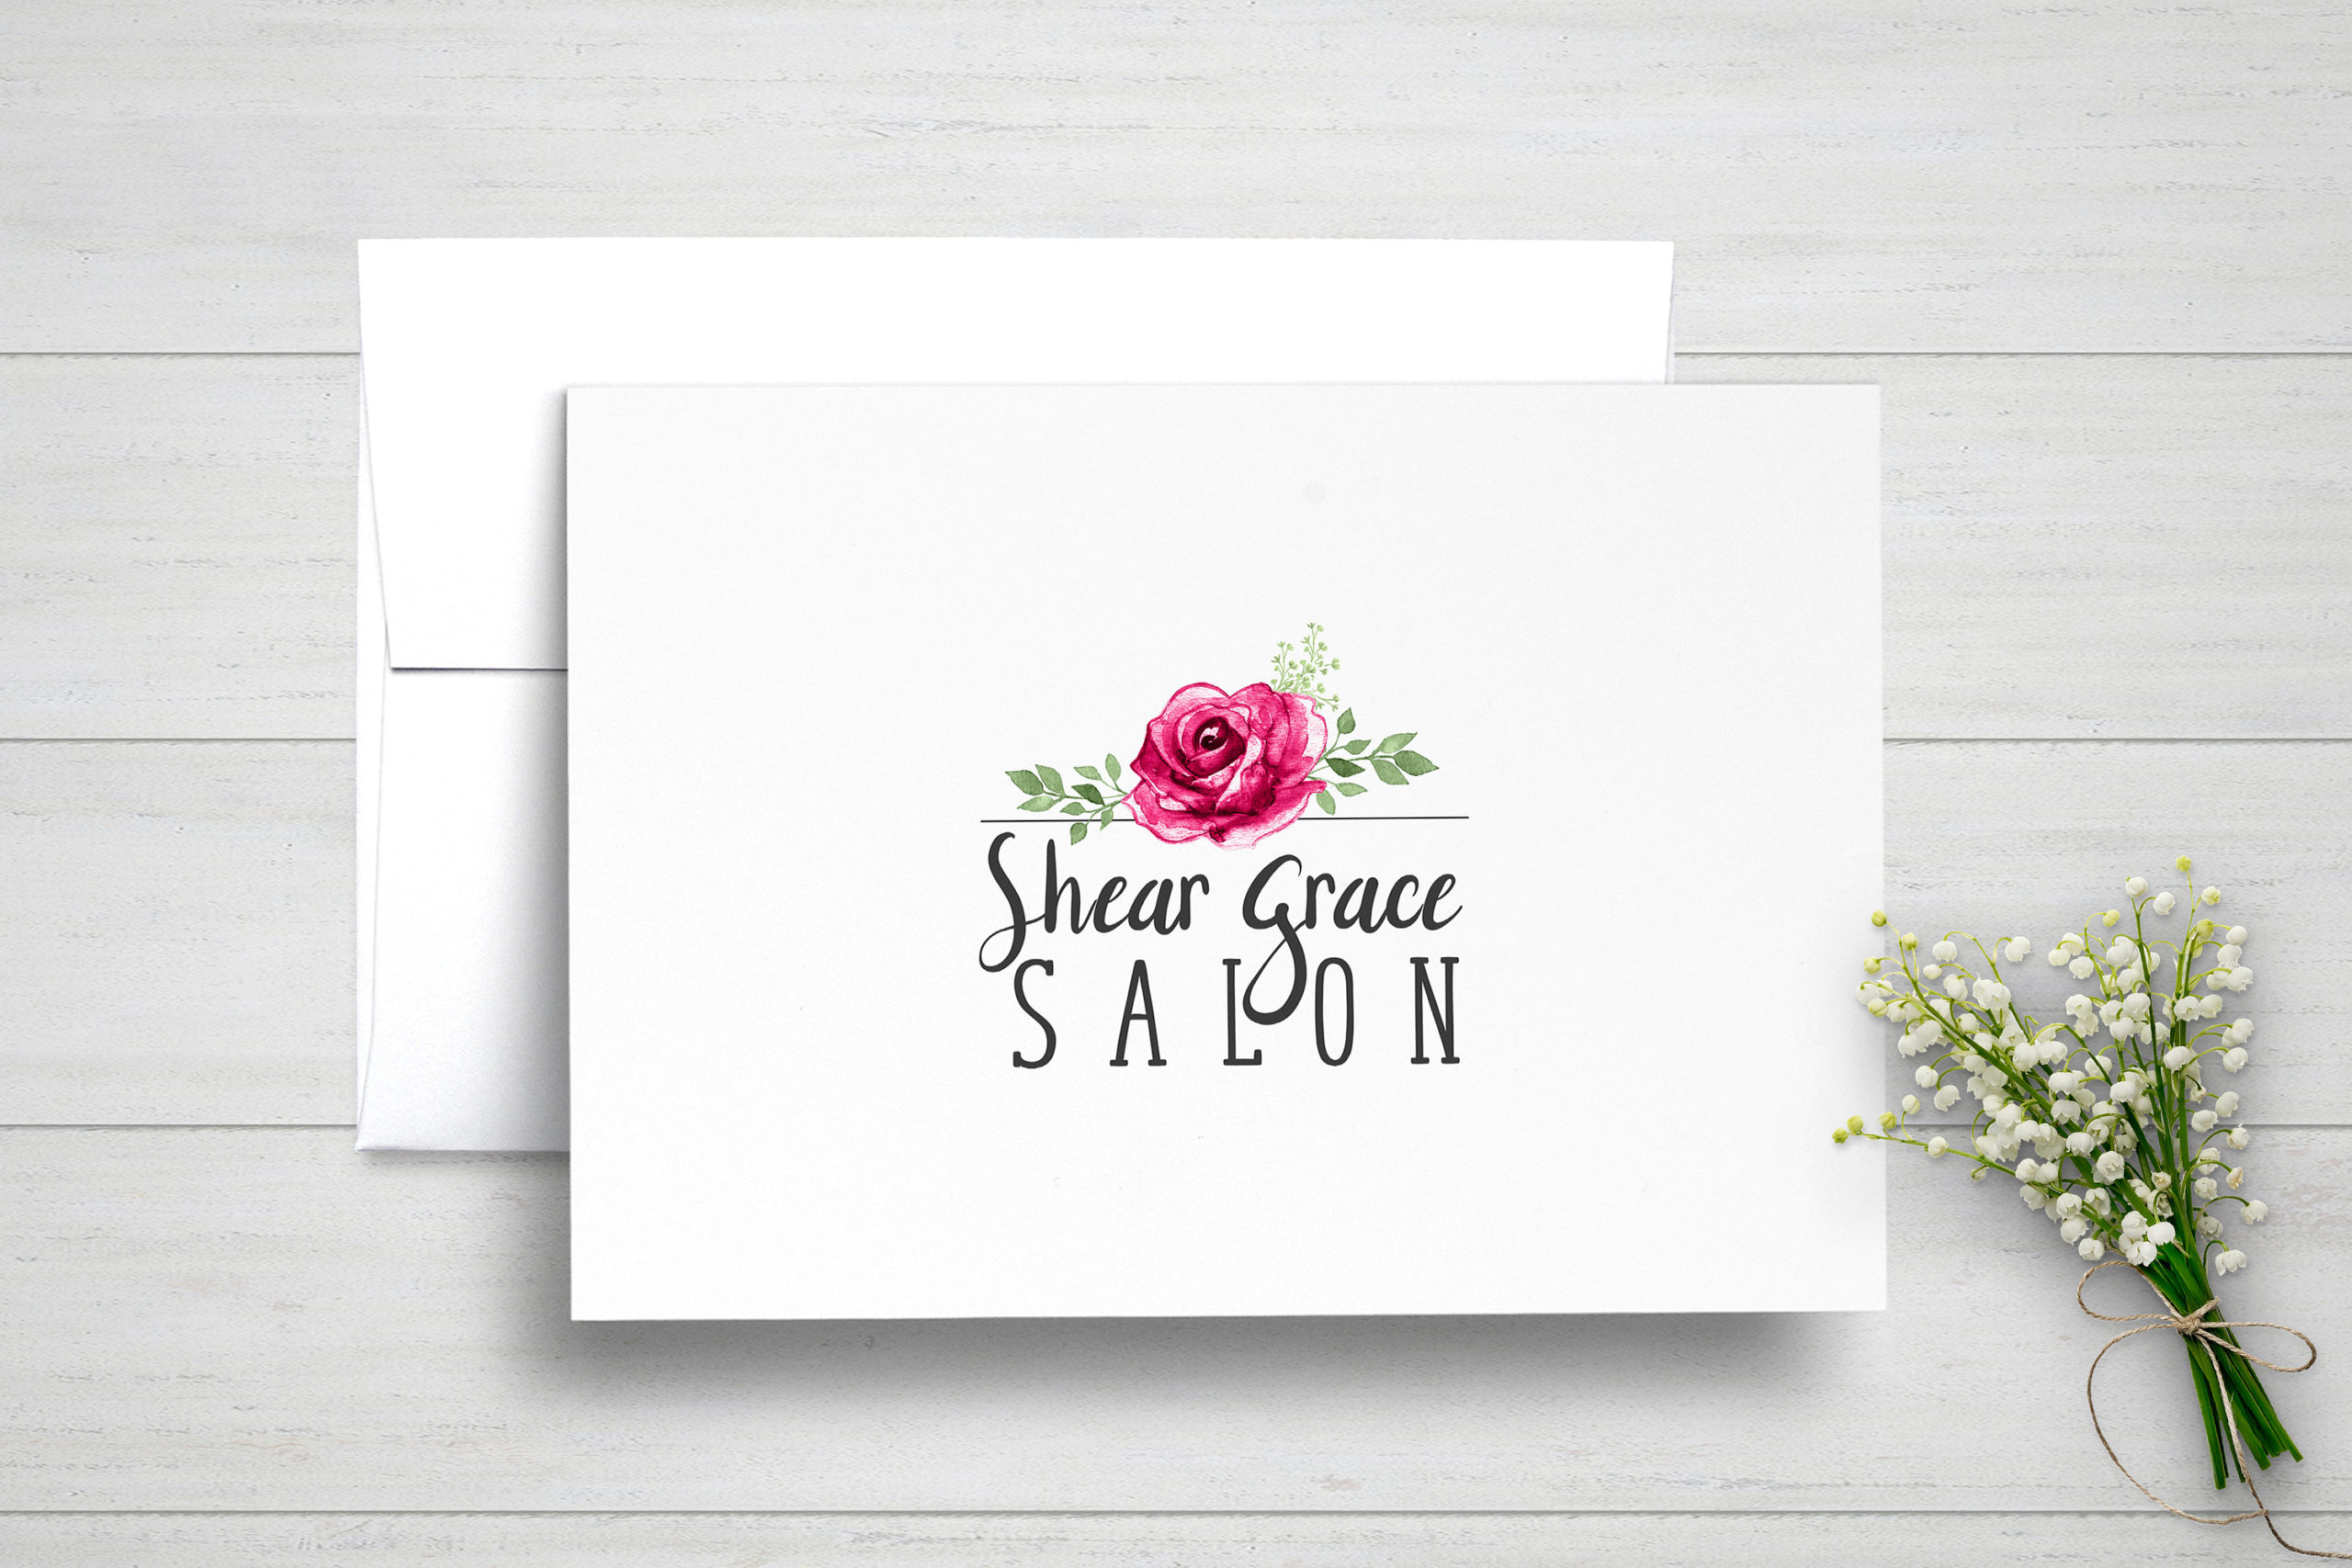 business note cards with logo 2